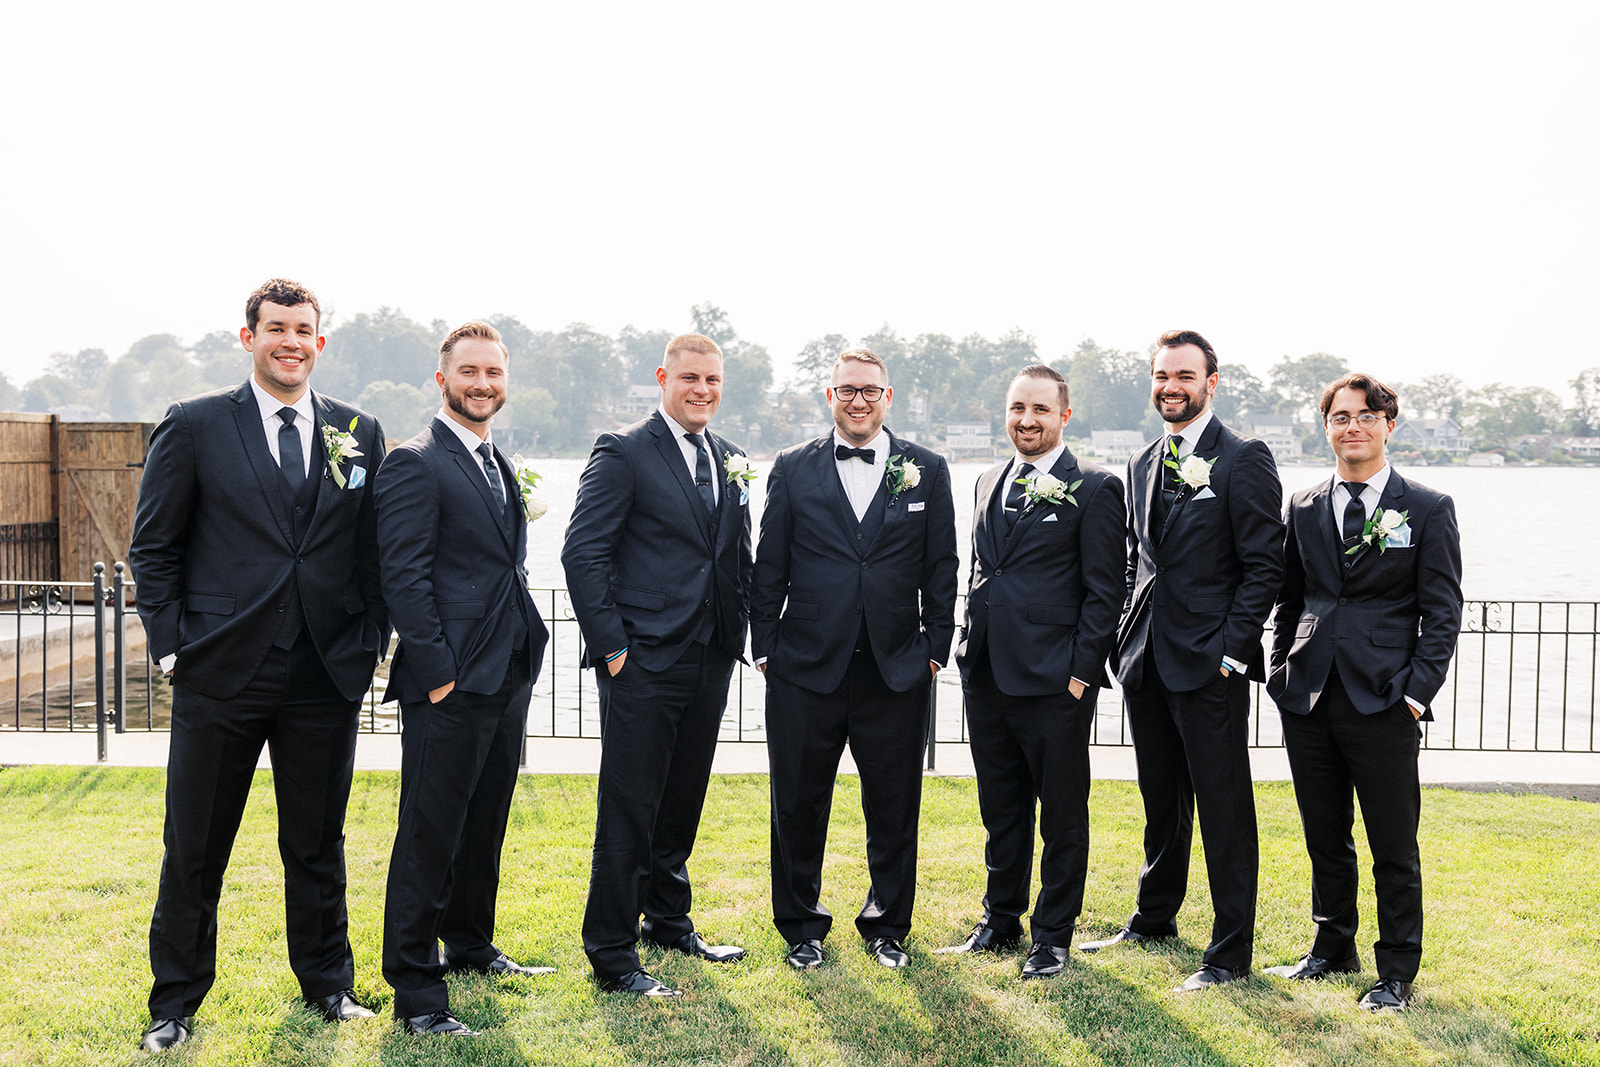 A groom stands with his wedding party on the waterfront in matching black suits